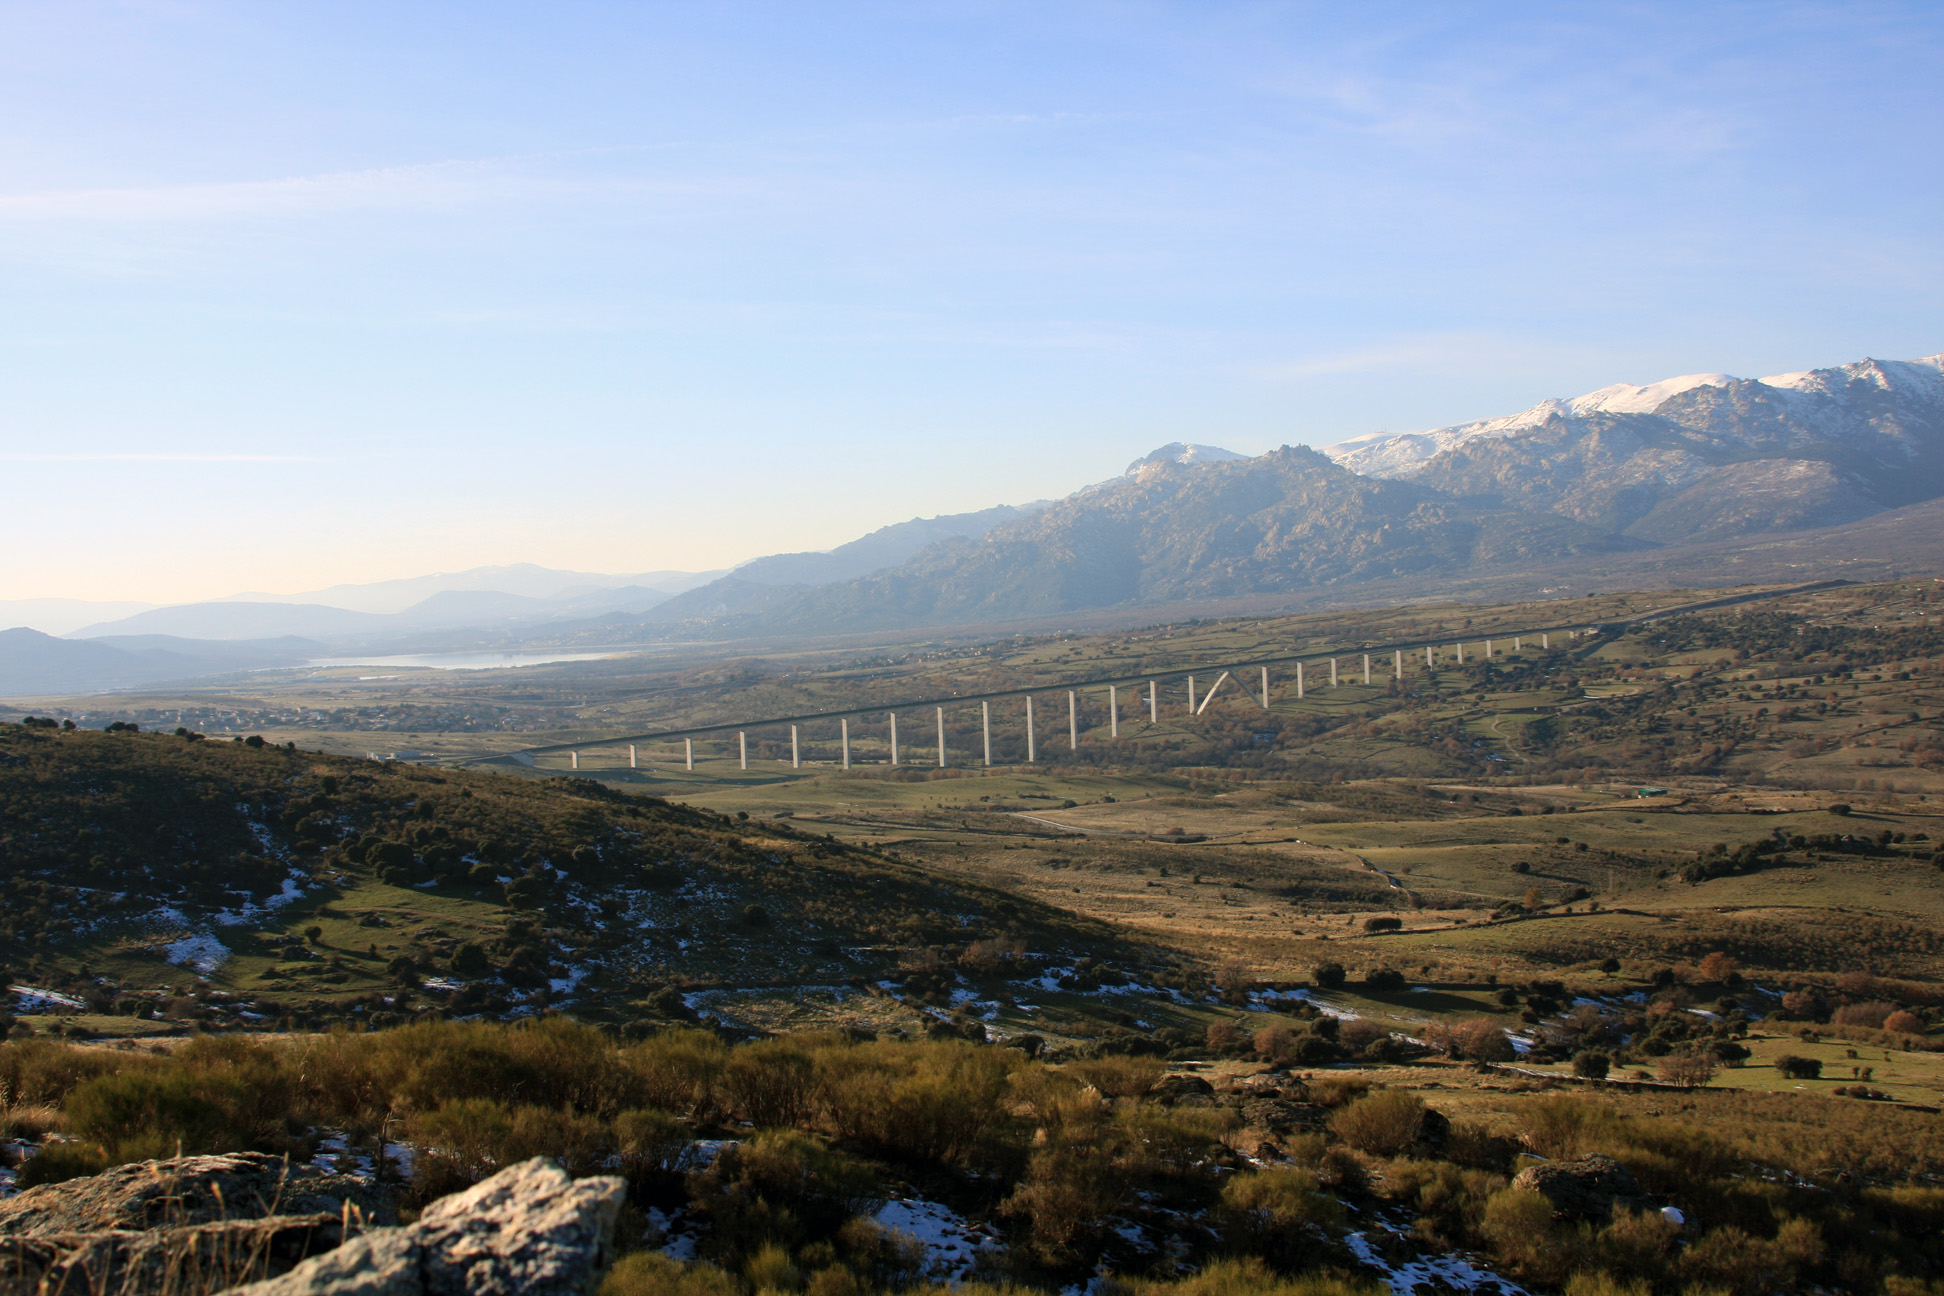 View over a sunny valley, with a long bridge and mountains in the distance